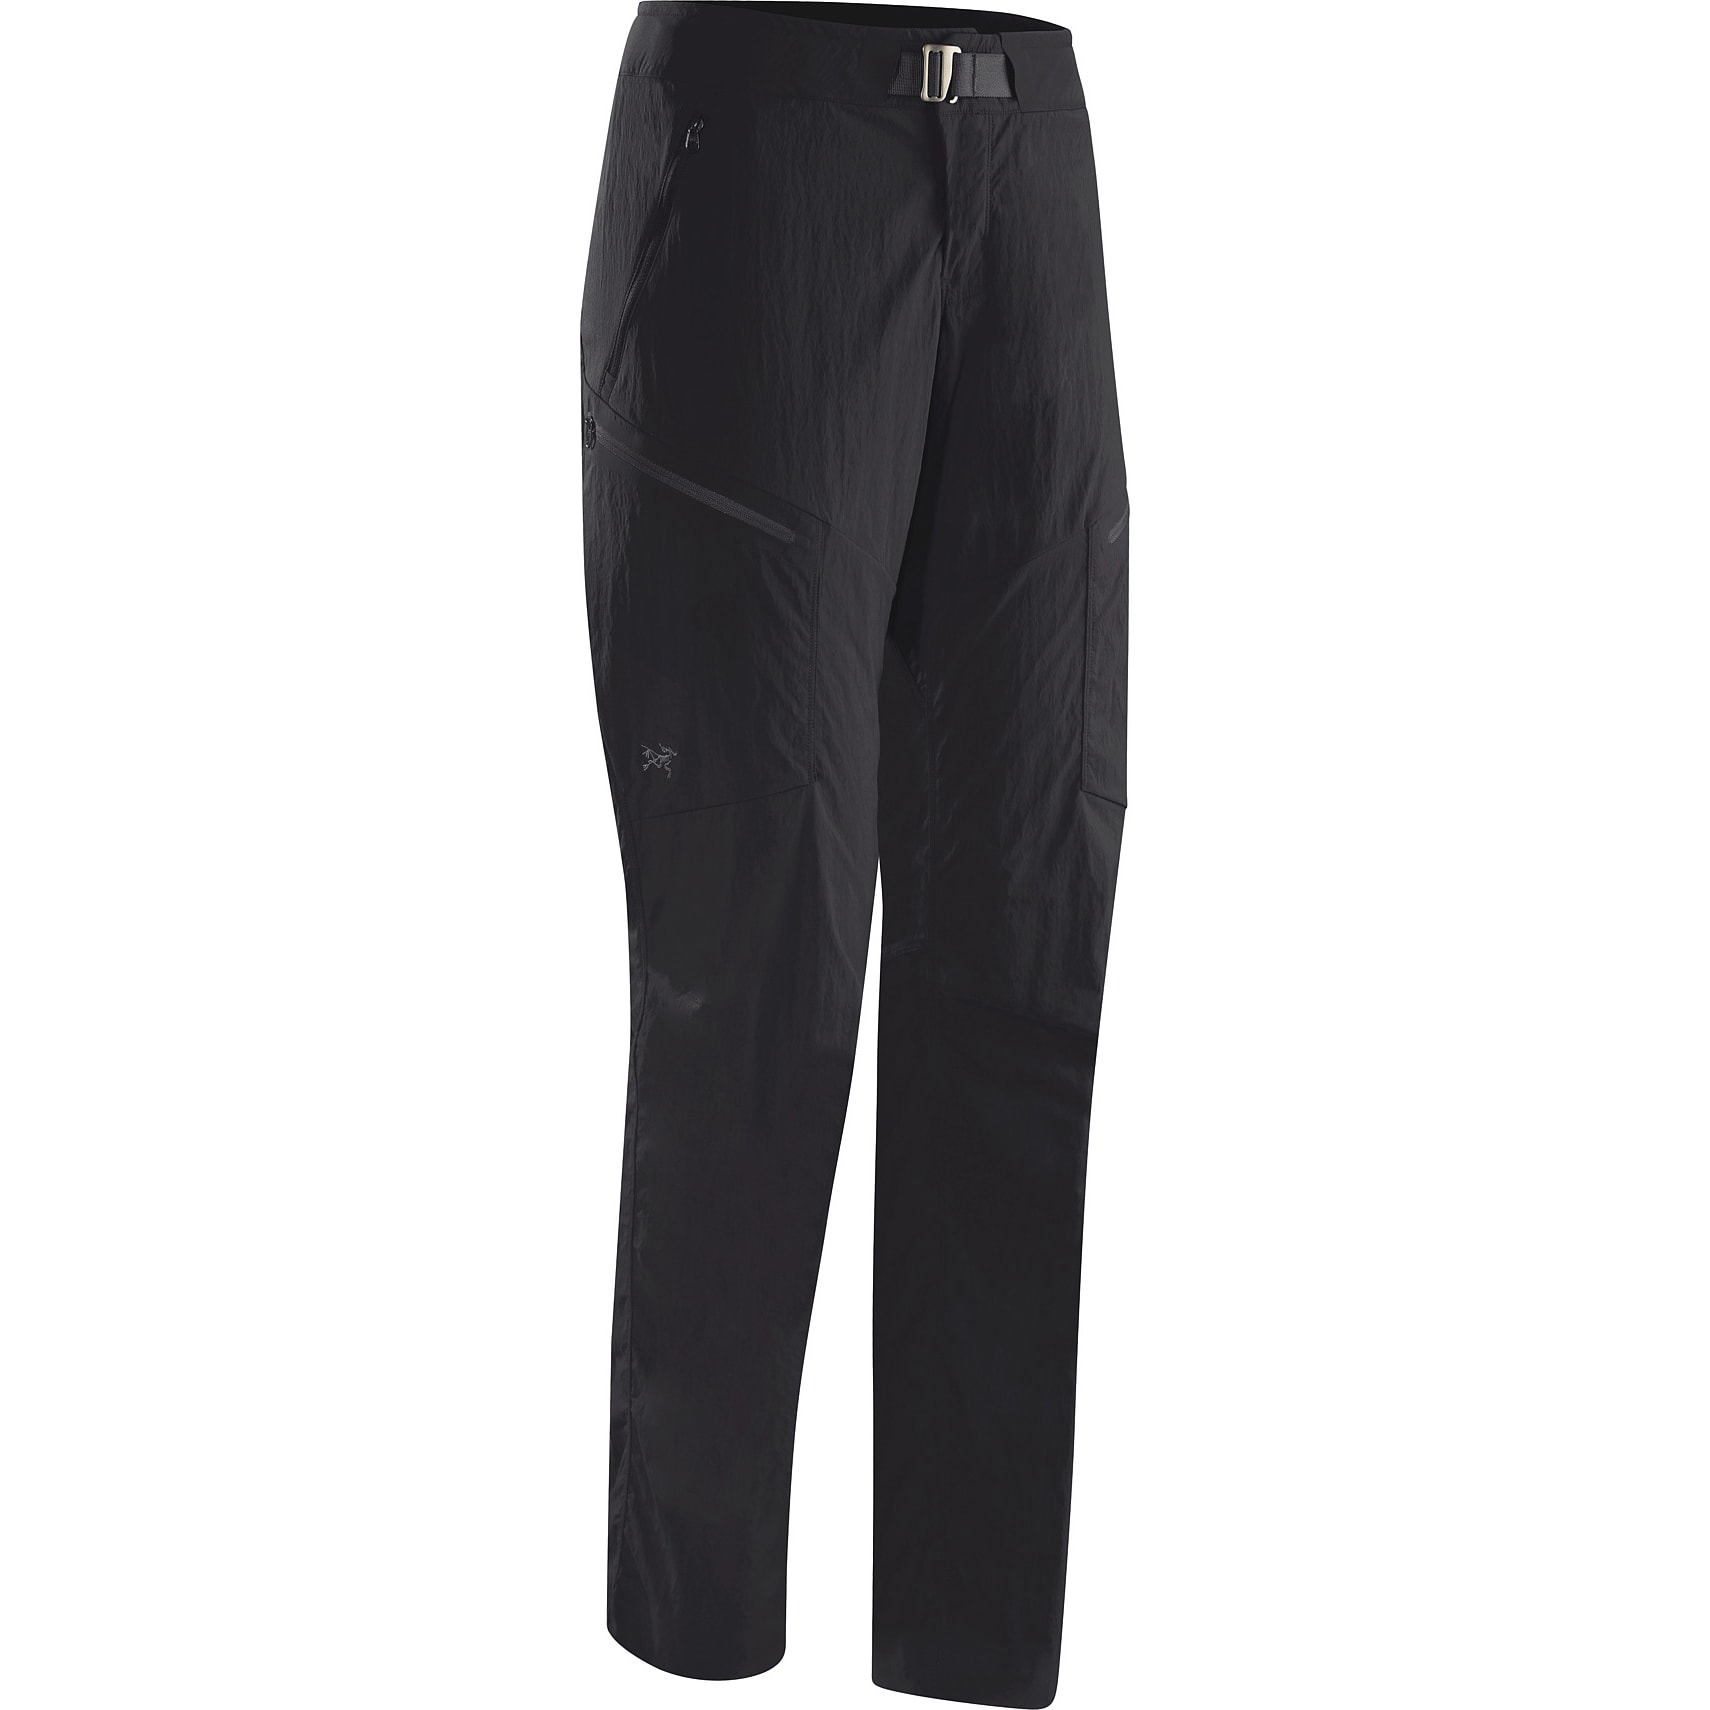 Buy Arc'teryx Palisade Pant Women's from Outnorth